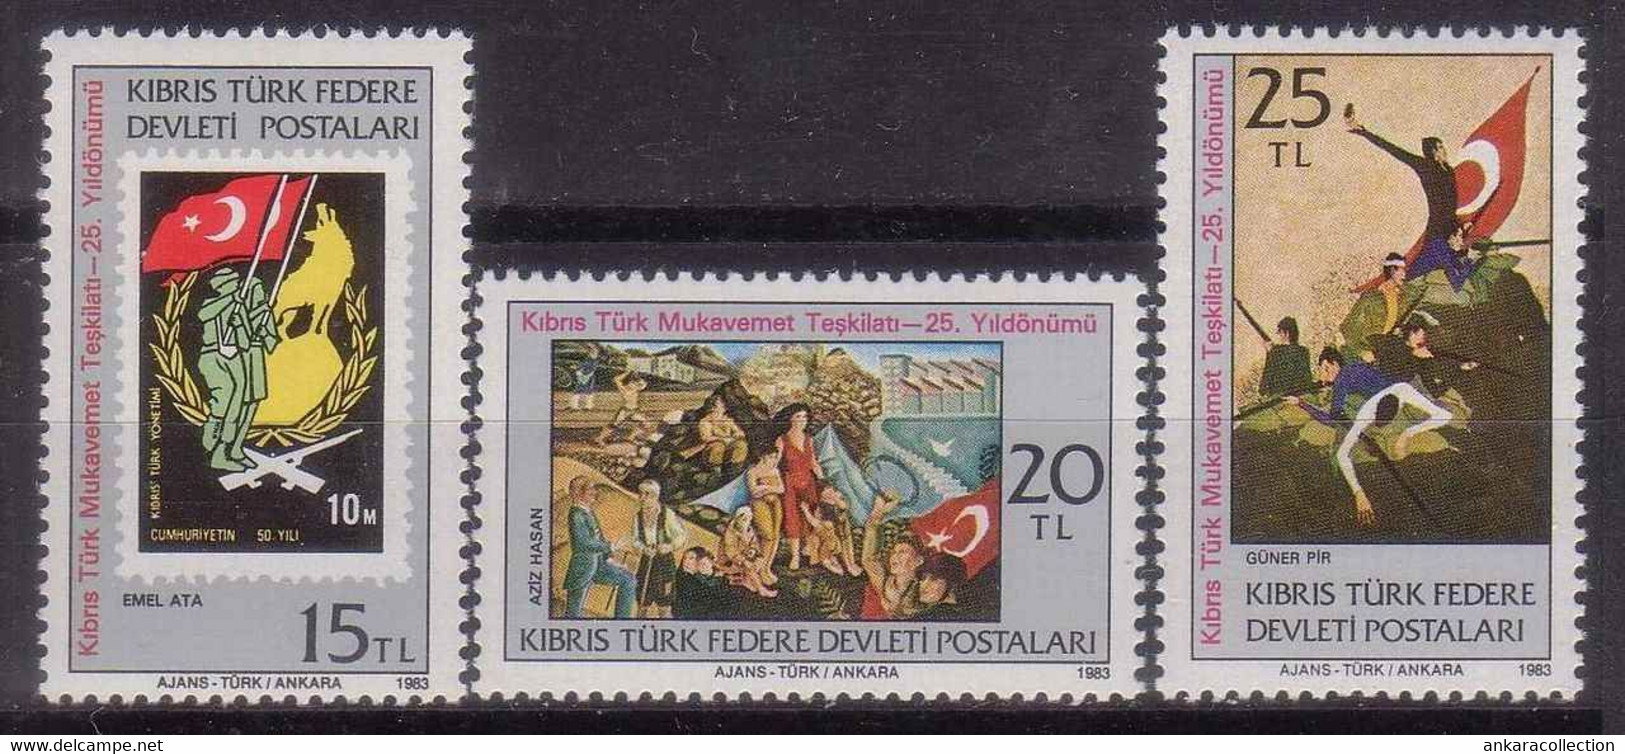 AC - NORTHERN CYPRUS STAMP -  ANNIVERSARIES AND EVENTS MNH 01 AUGUST 1983 - Nuovi